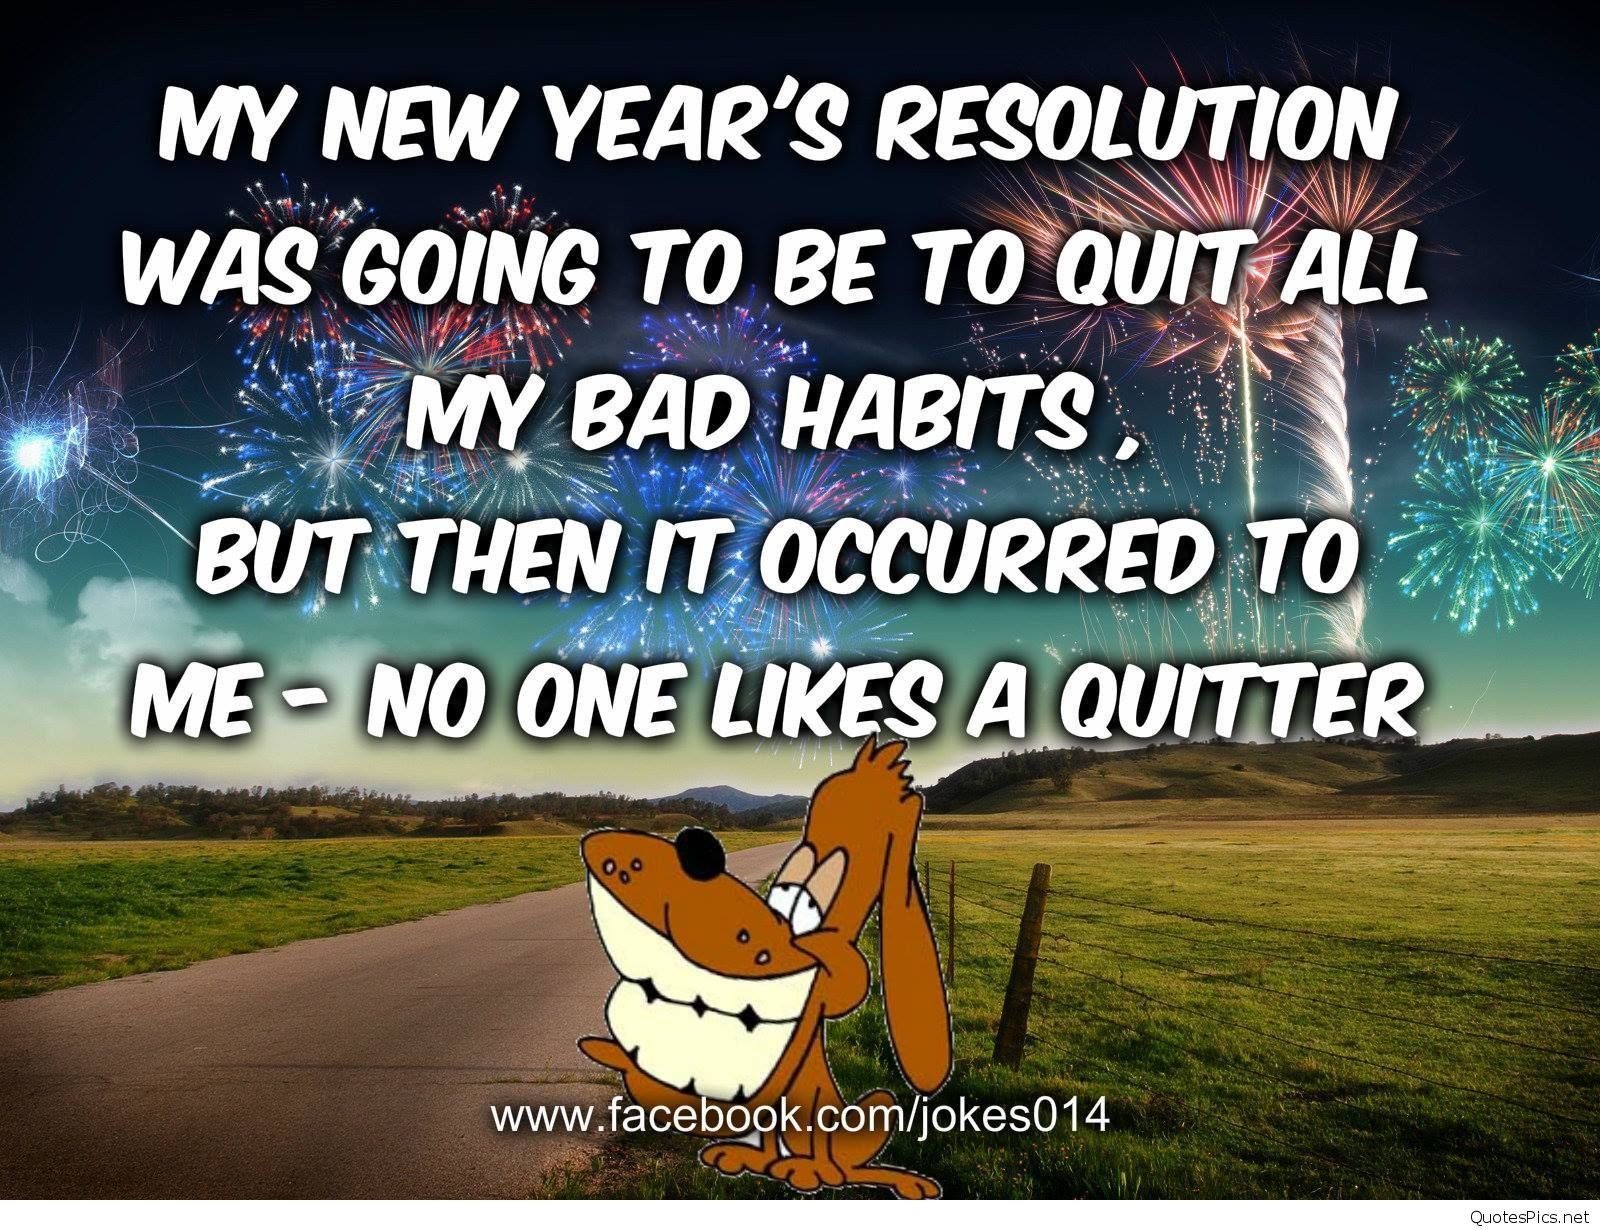 New Year Quotes Funny
 Funny happy new year resolutions images & sayings cards 2017